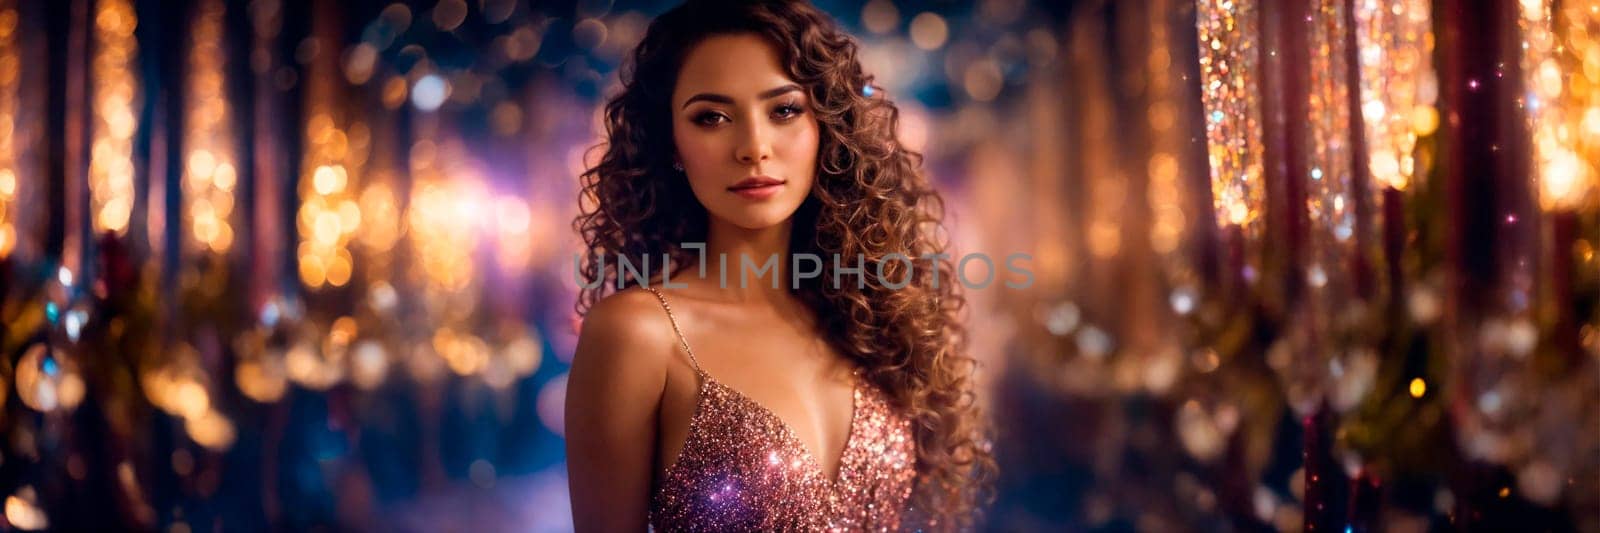 girl in a shiny evening dress. Selective focus. people.